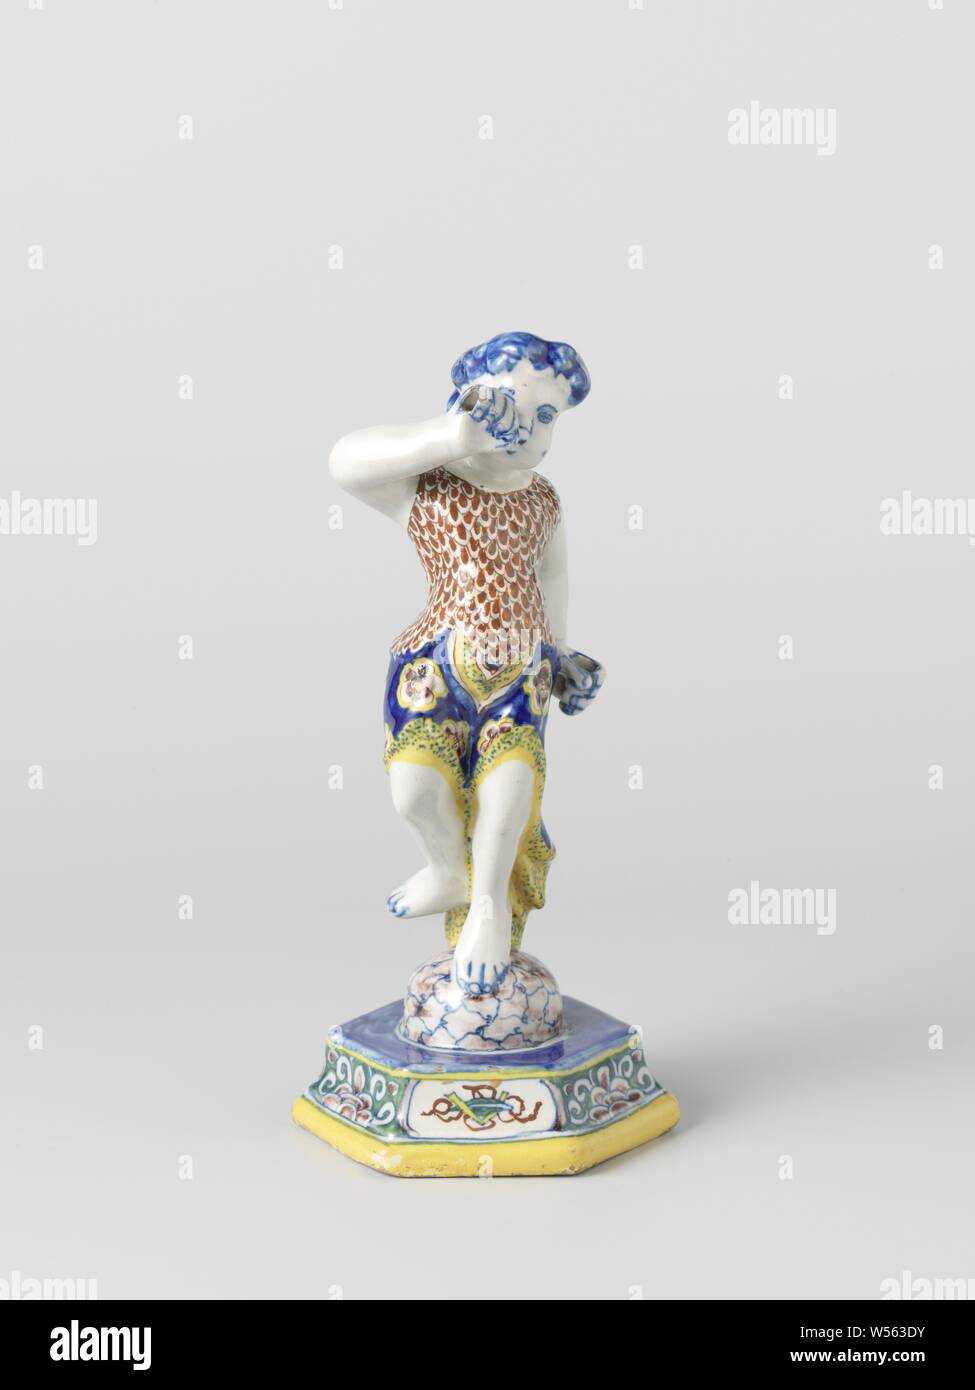 Multicolored painted decorative object from faience, Human figure from faience. Multicolored decorated. Probably represents the trumpet-blowing genius., anonymous, Delft, c. 1720 - c. 1750, h 22.5 cm × d 10.6 cm Stock Photo